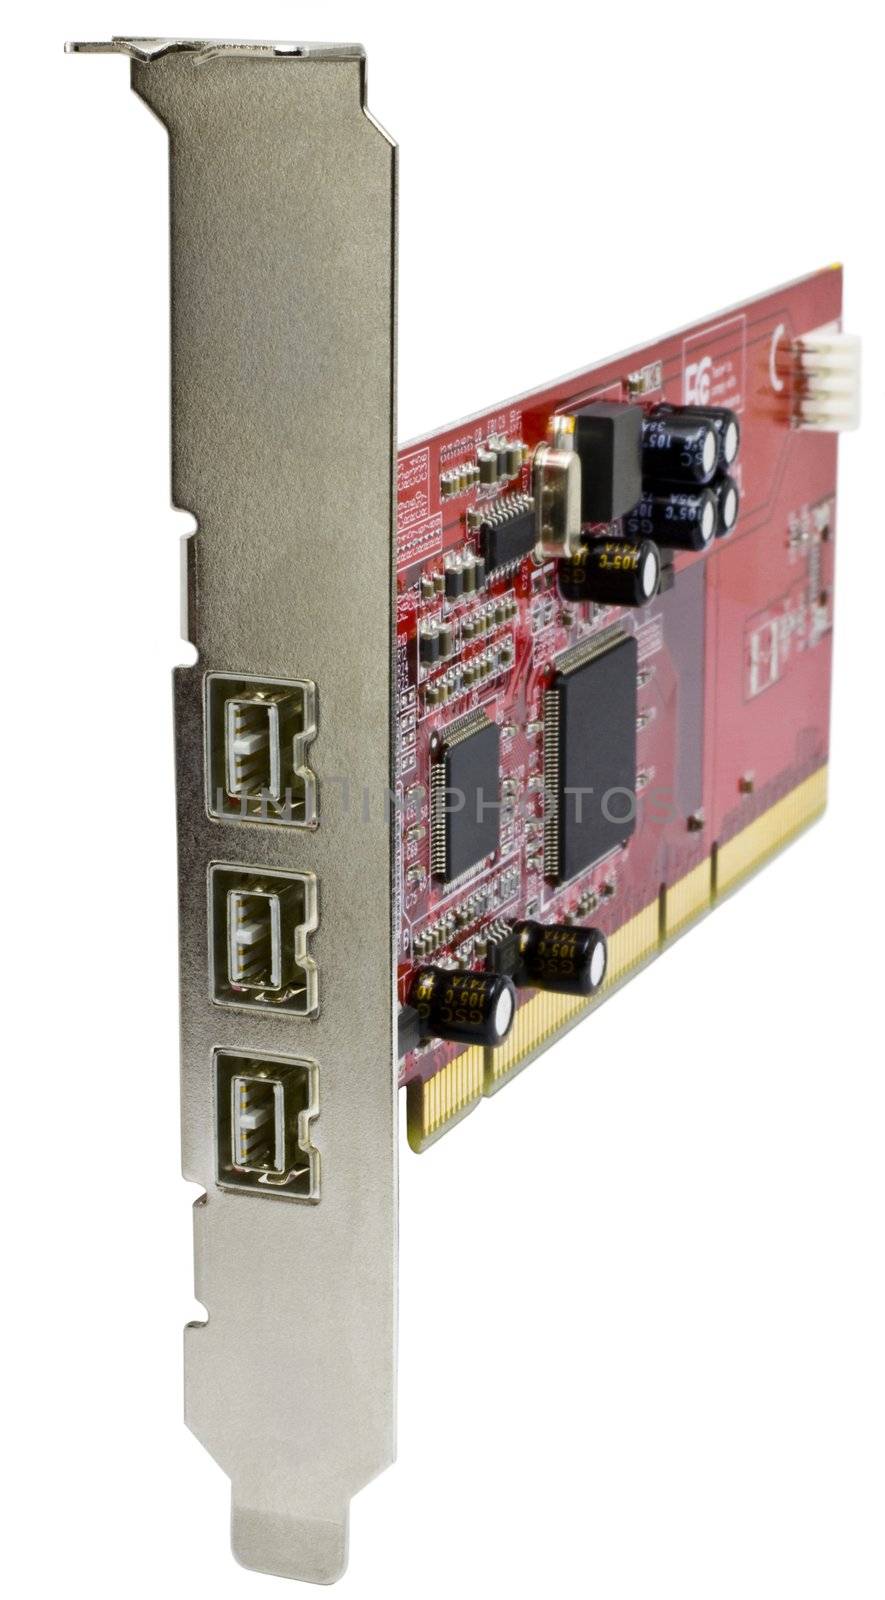 Firewire 800 Card for server computers by gewoldi